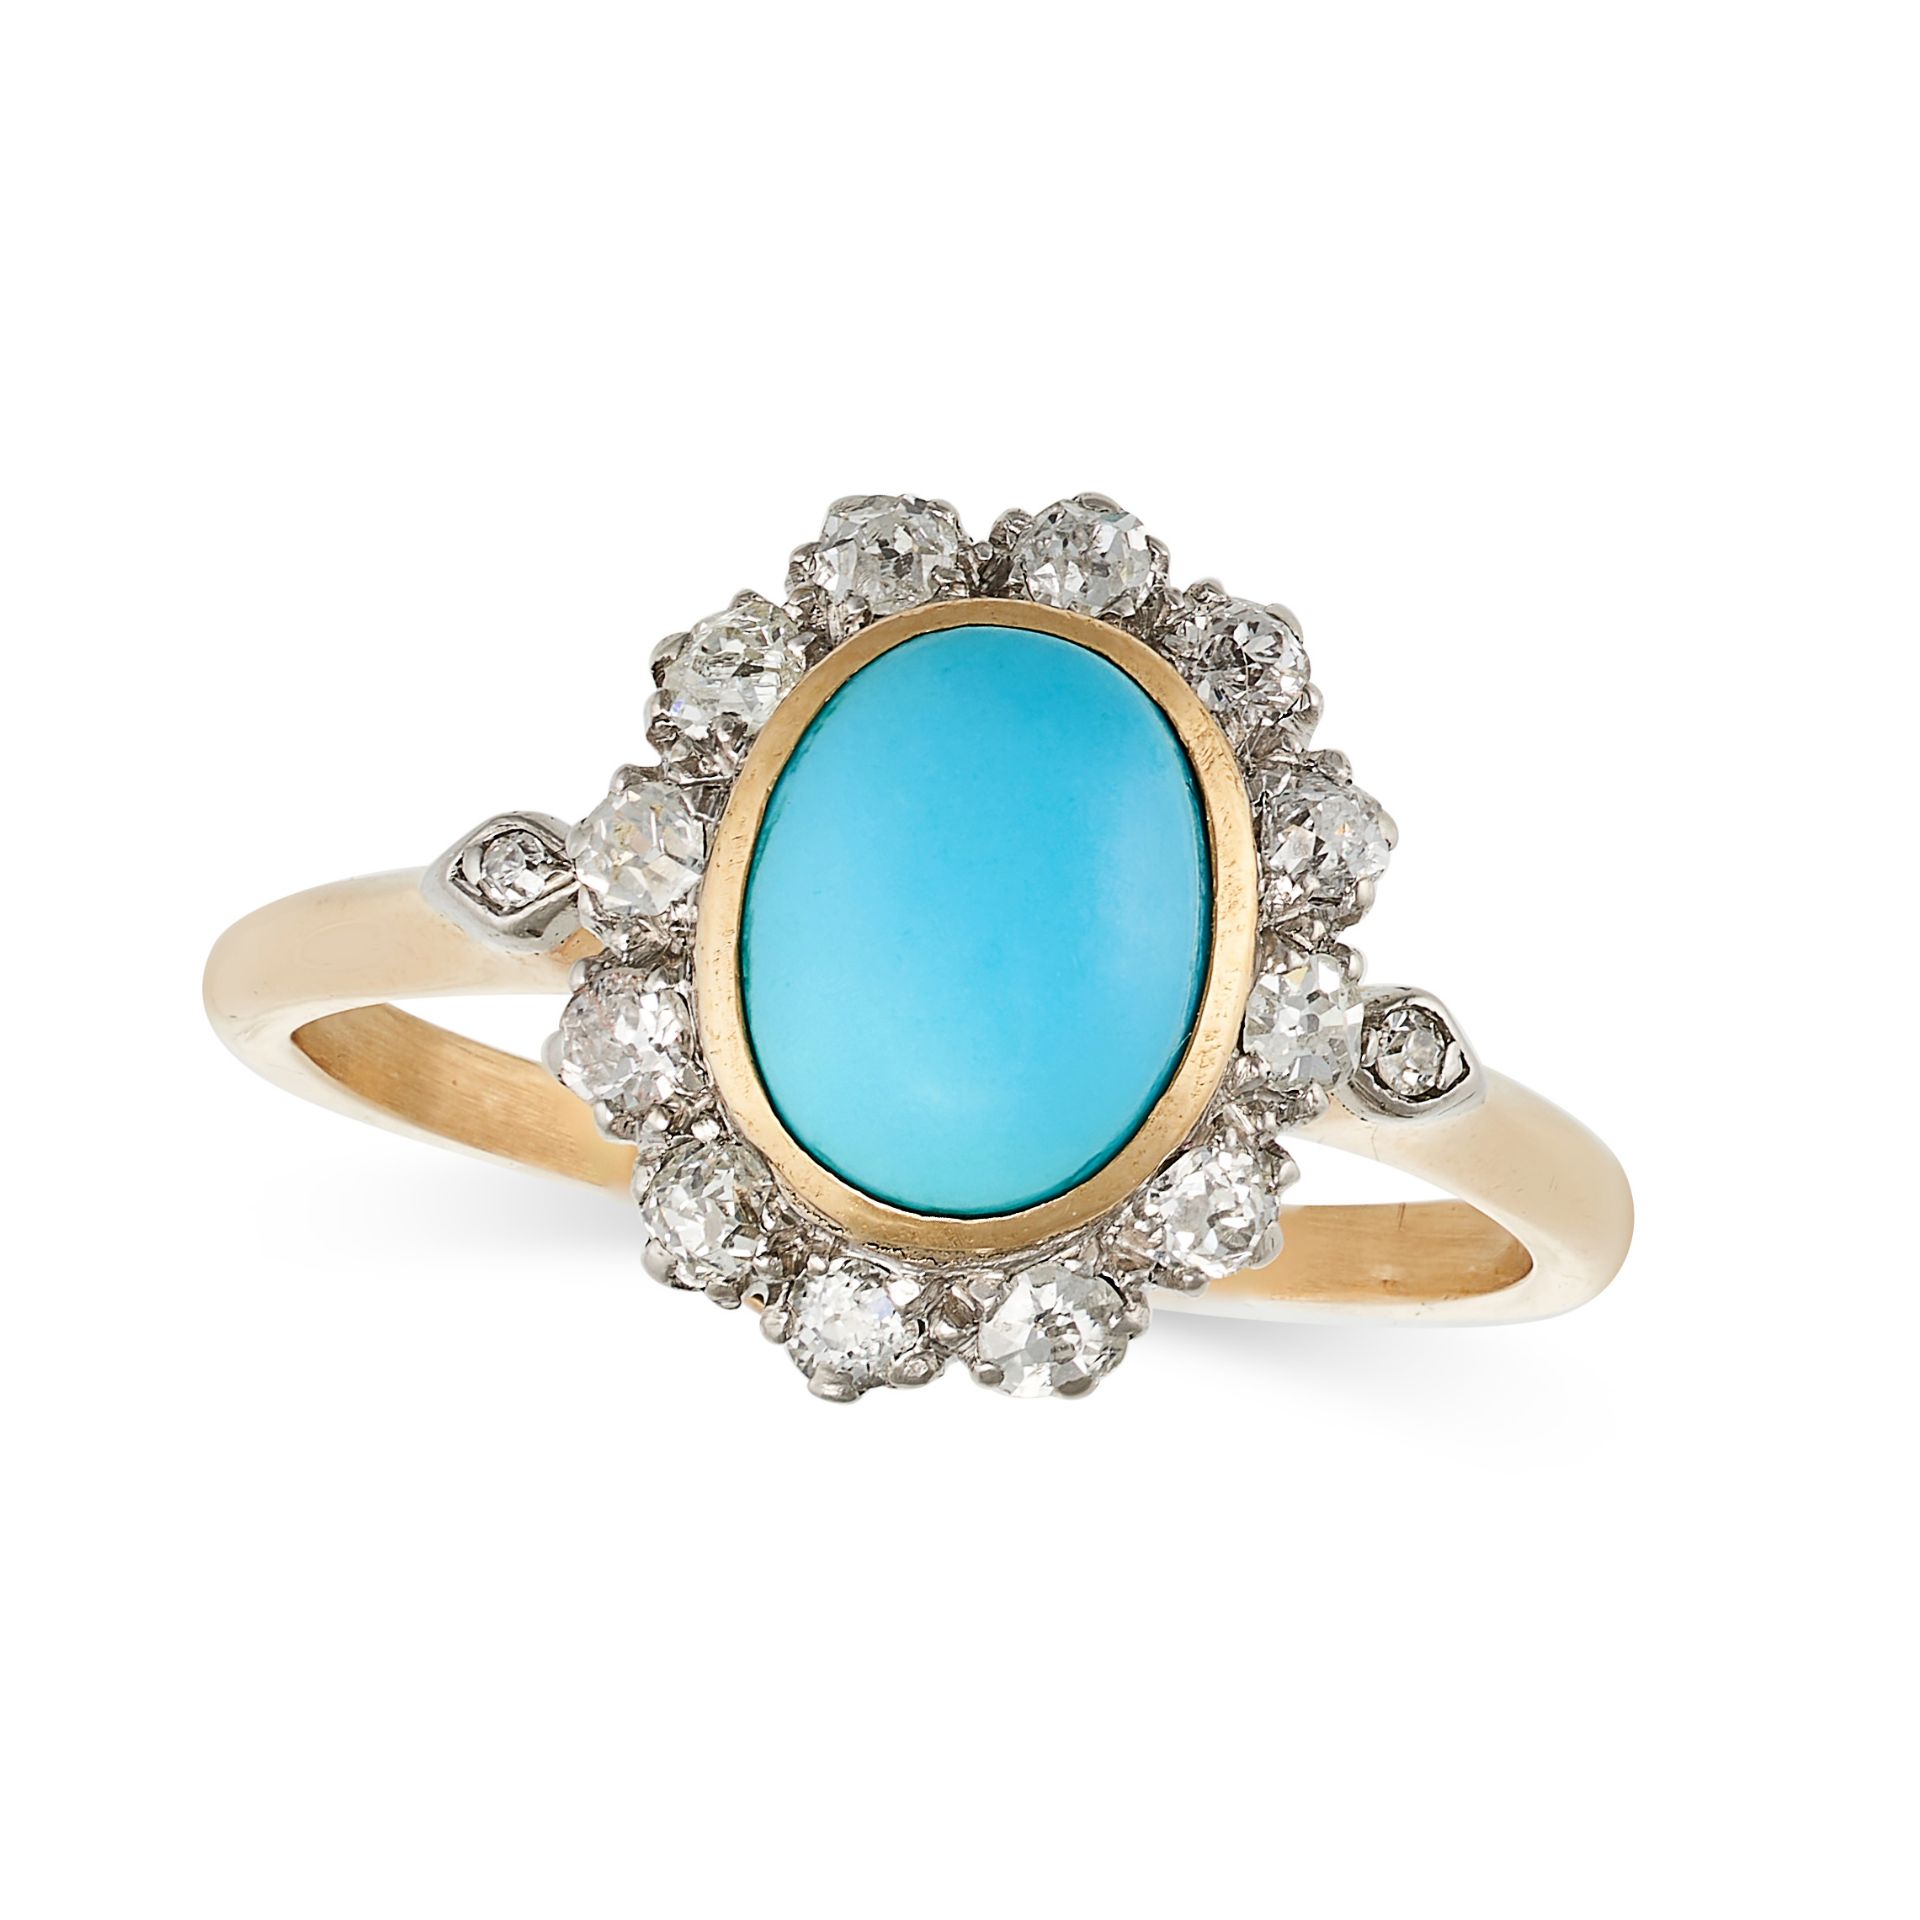 A TURQUOISE AND DIAMOND CLUSTER RING in yellow gold, set with an oval cabochon turquoise in a clu...